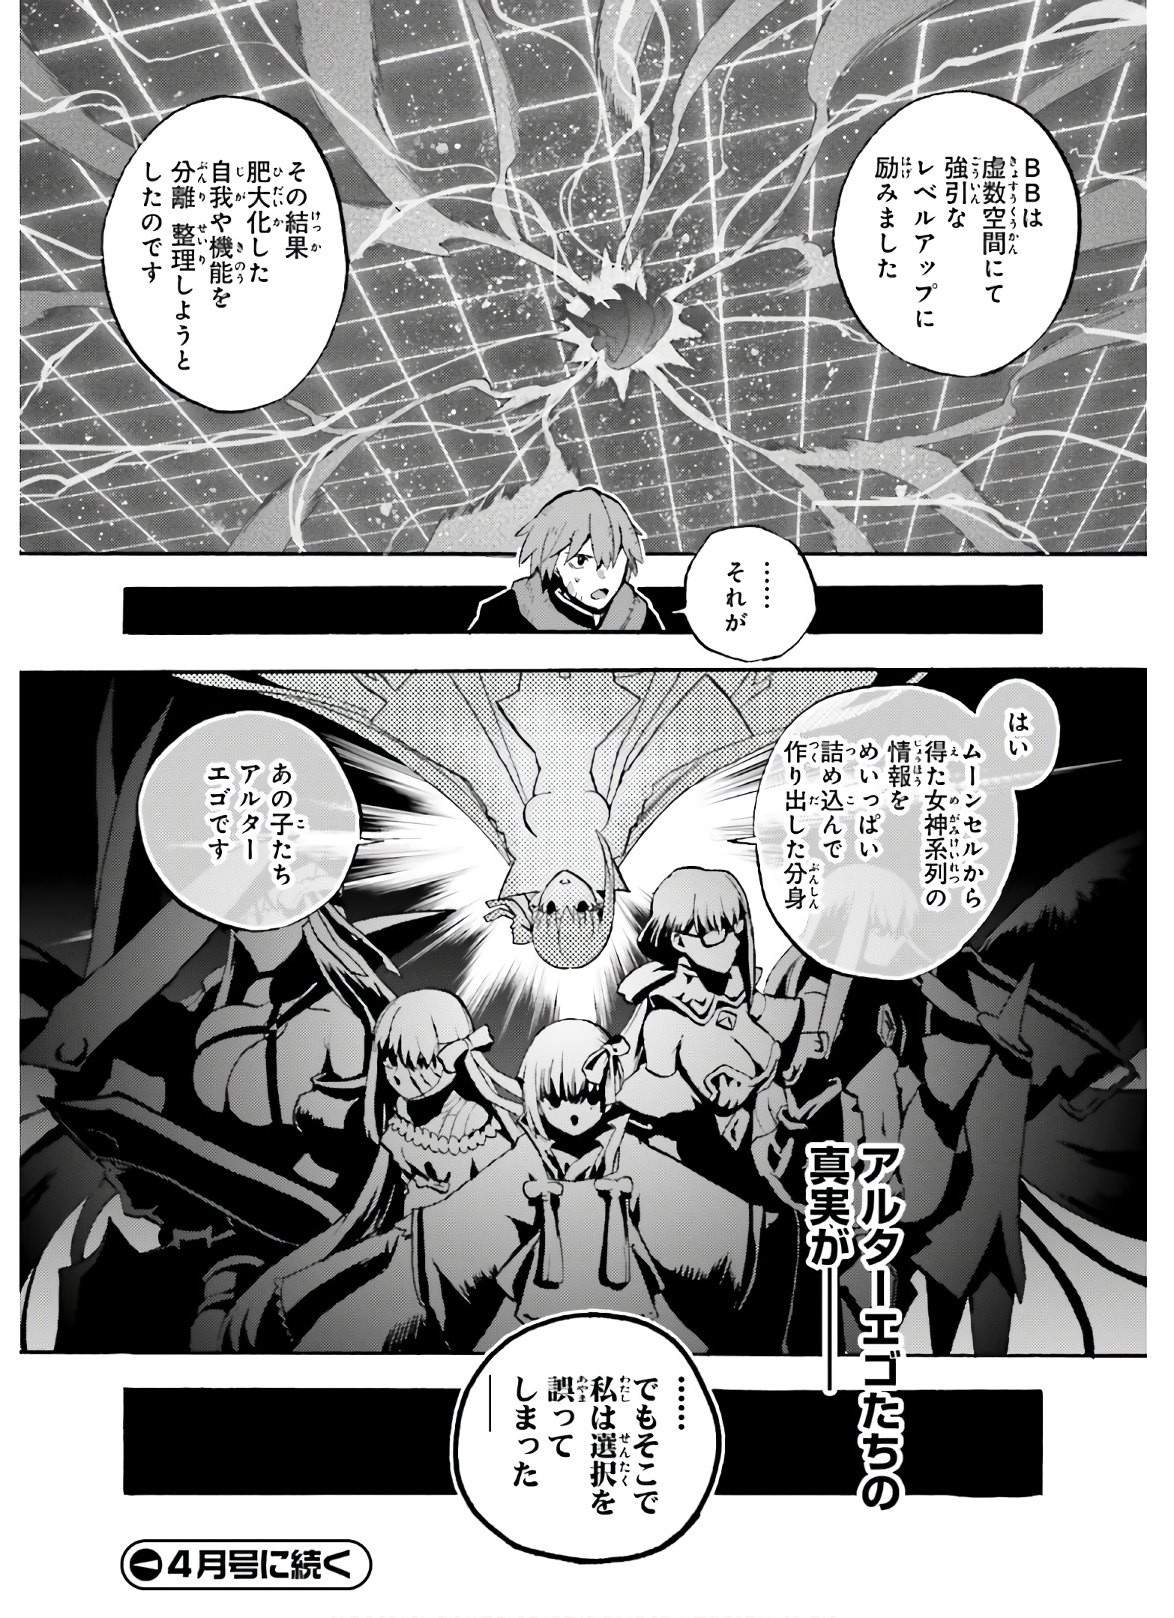 Fate/Kaleid Liner Prisma Illya Drei! - Chapter 62-1 - Page 24